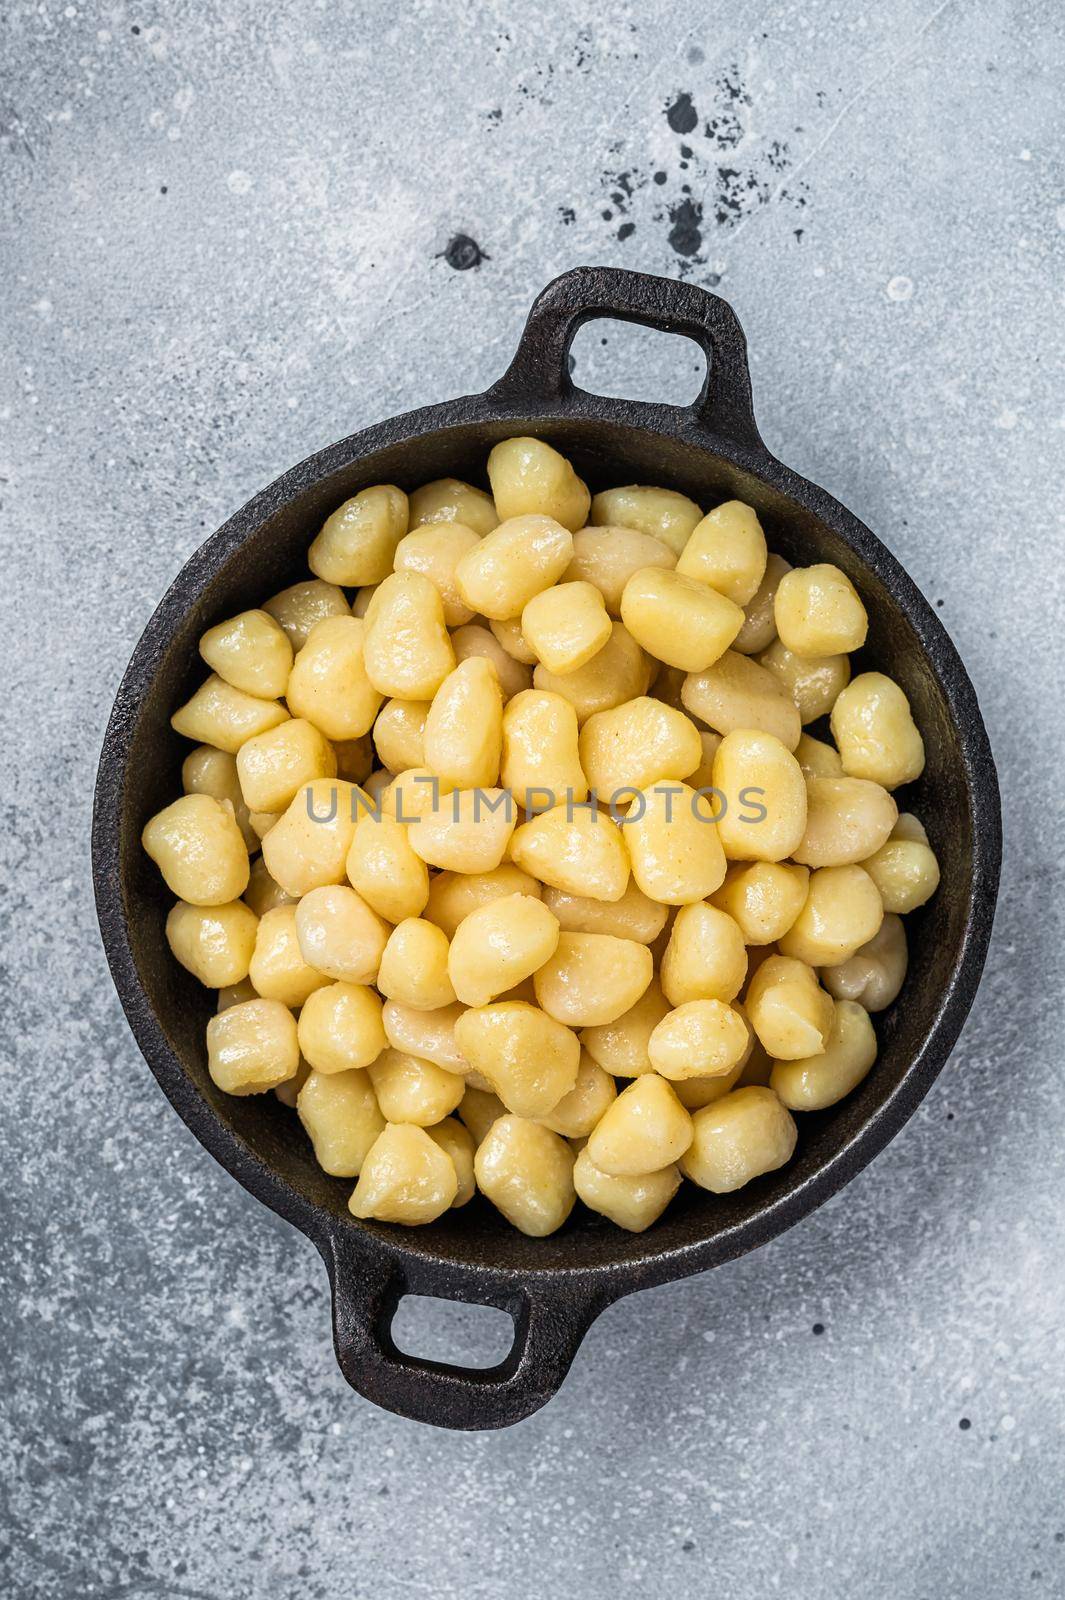 Cooked Gnocchi with Butter and Pepper. Gray background. Top view.